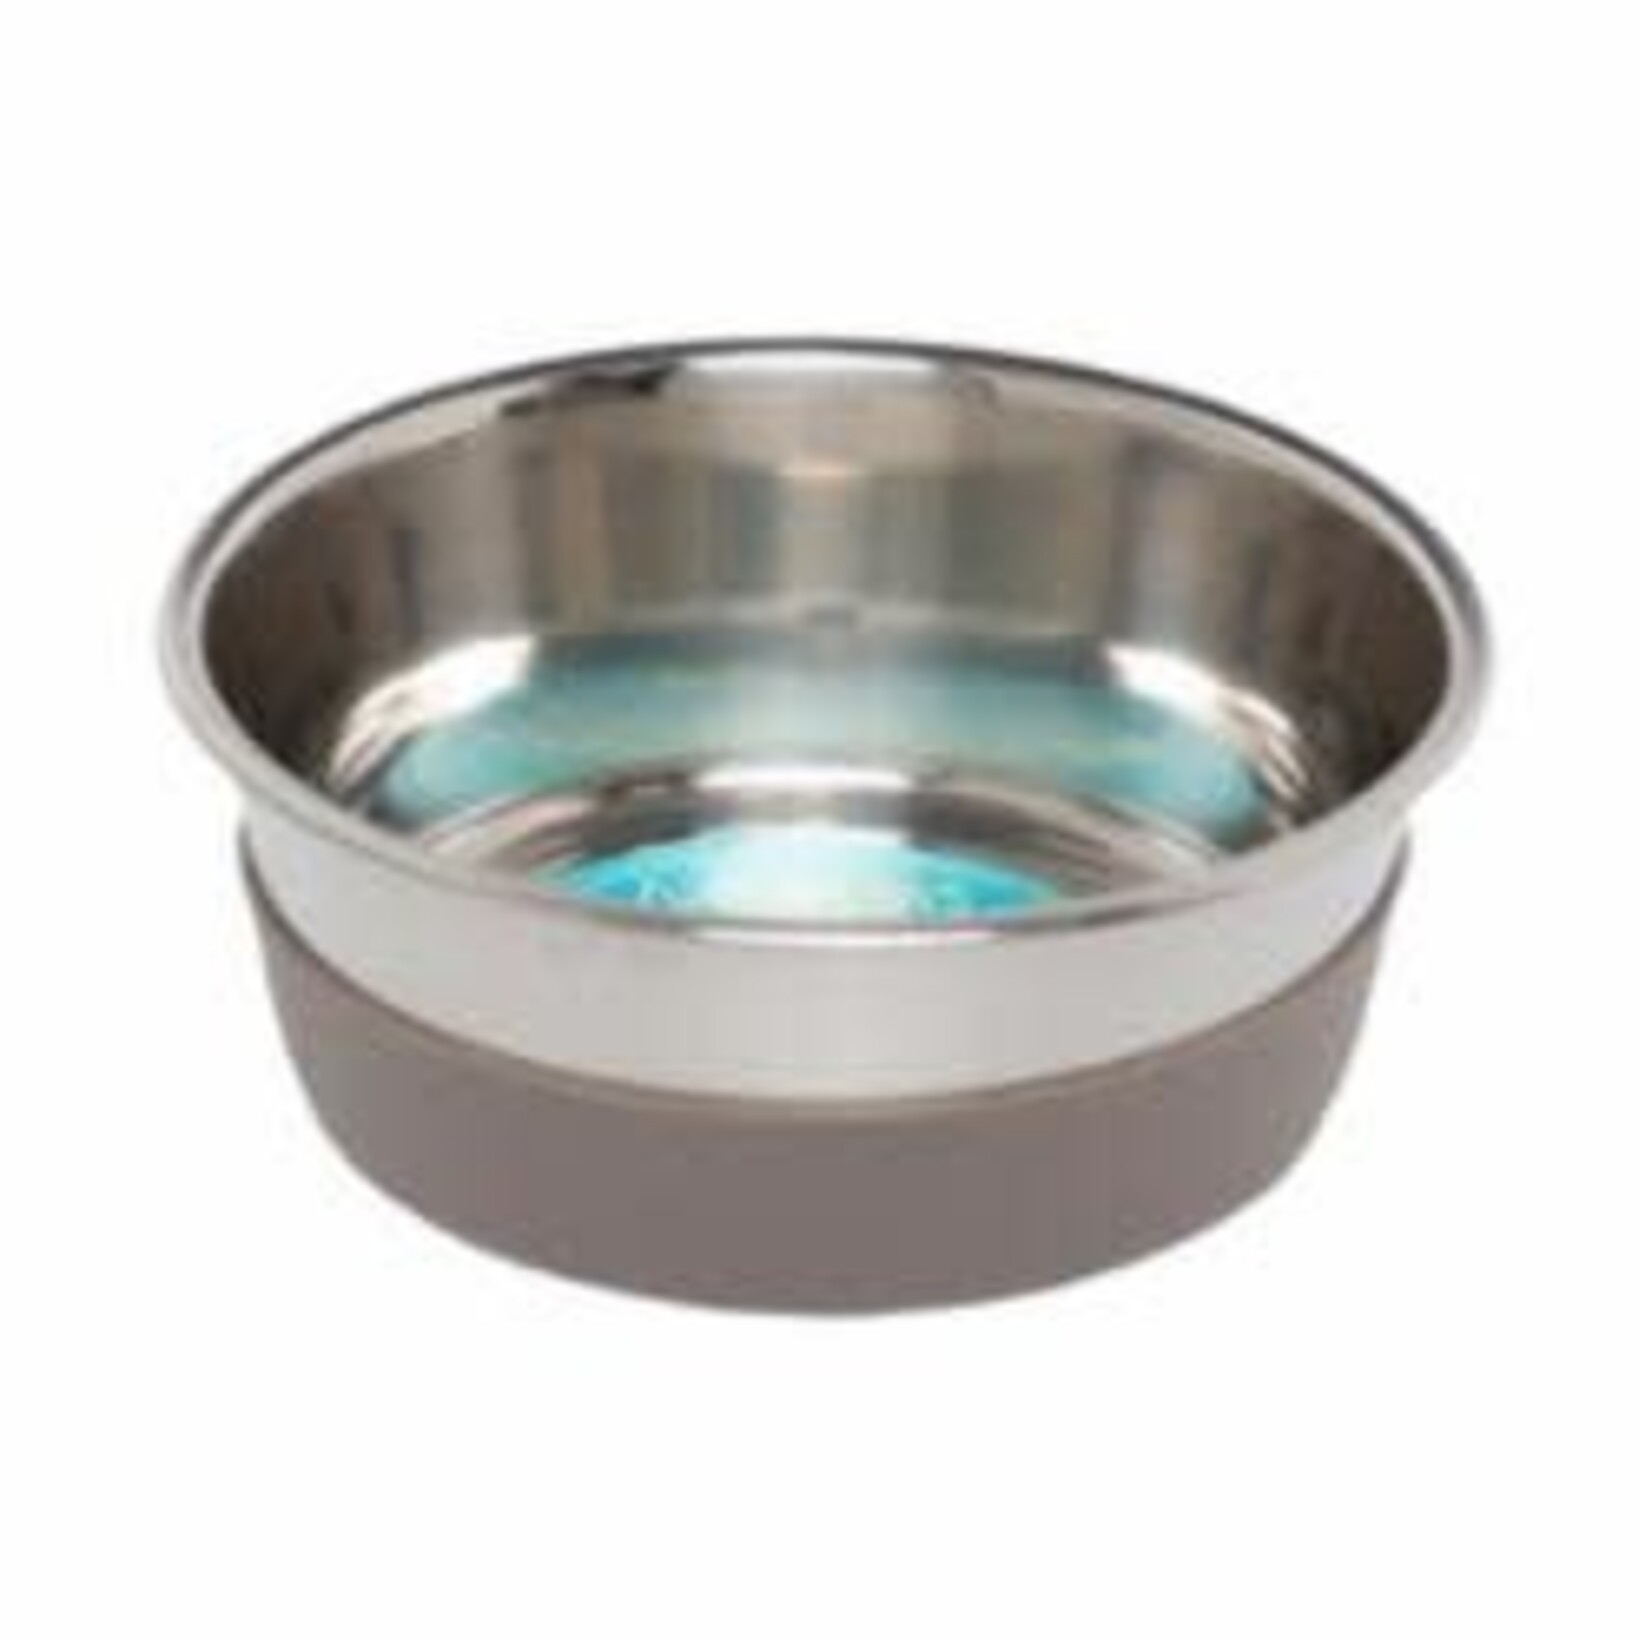 Messy Mutts Messy Mutts Stainless Steel Bowl With Nonslip Bottom SM